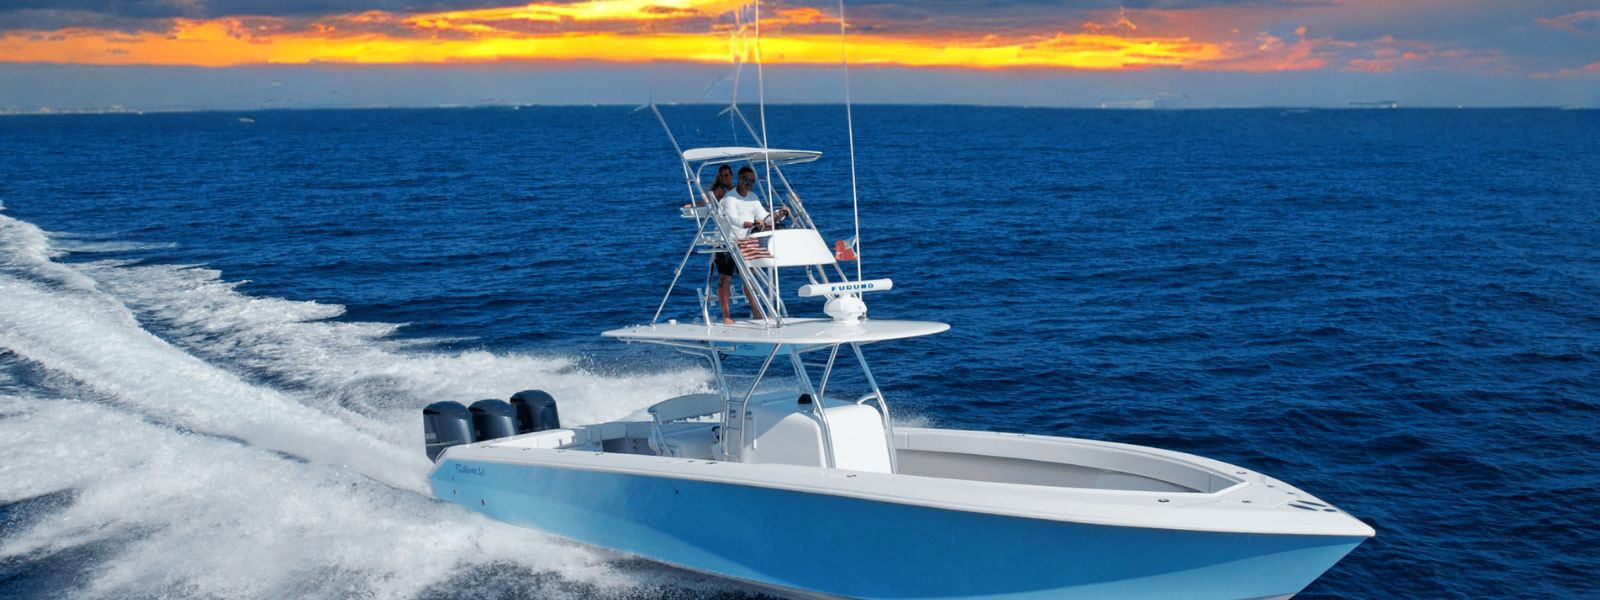 An Insider’s Guide to Boating Adventures in The Bahamas